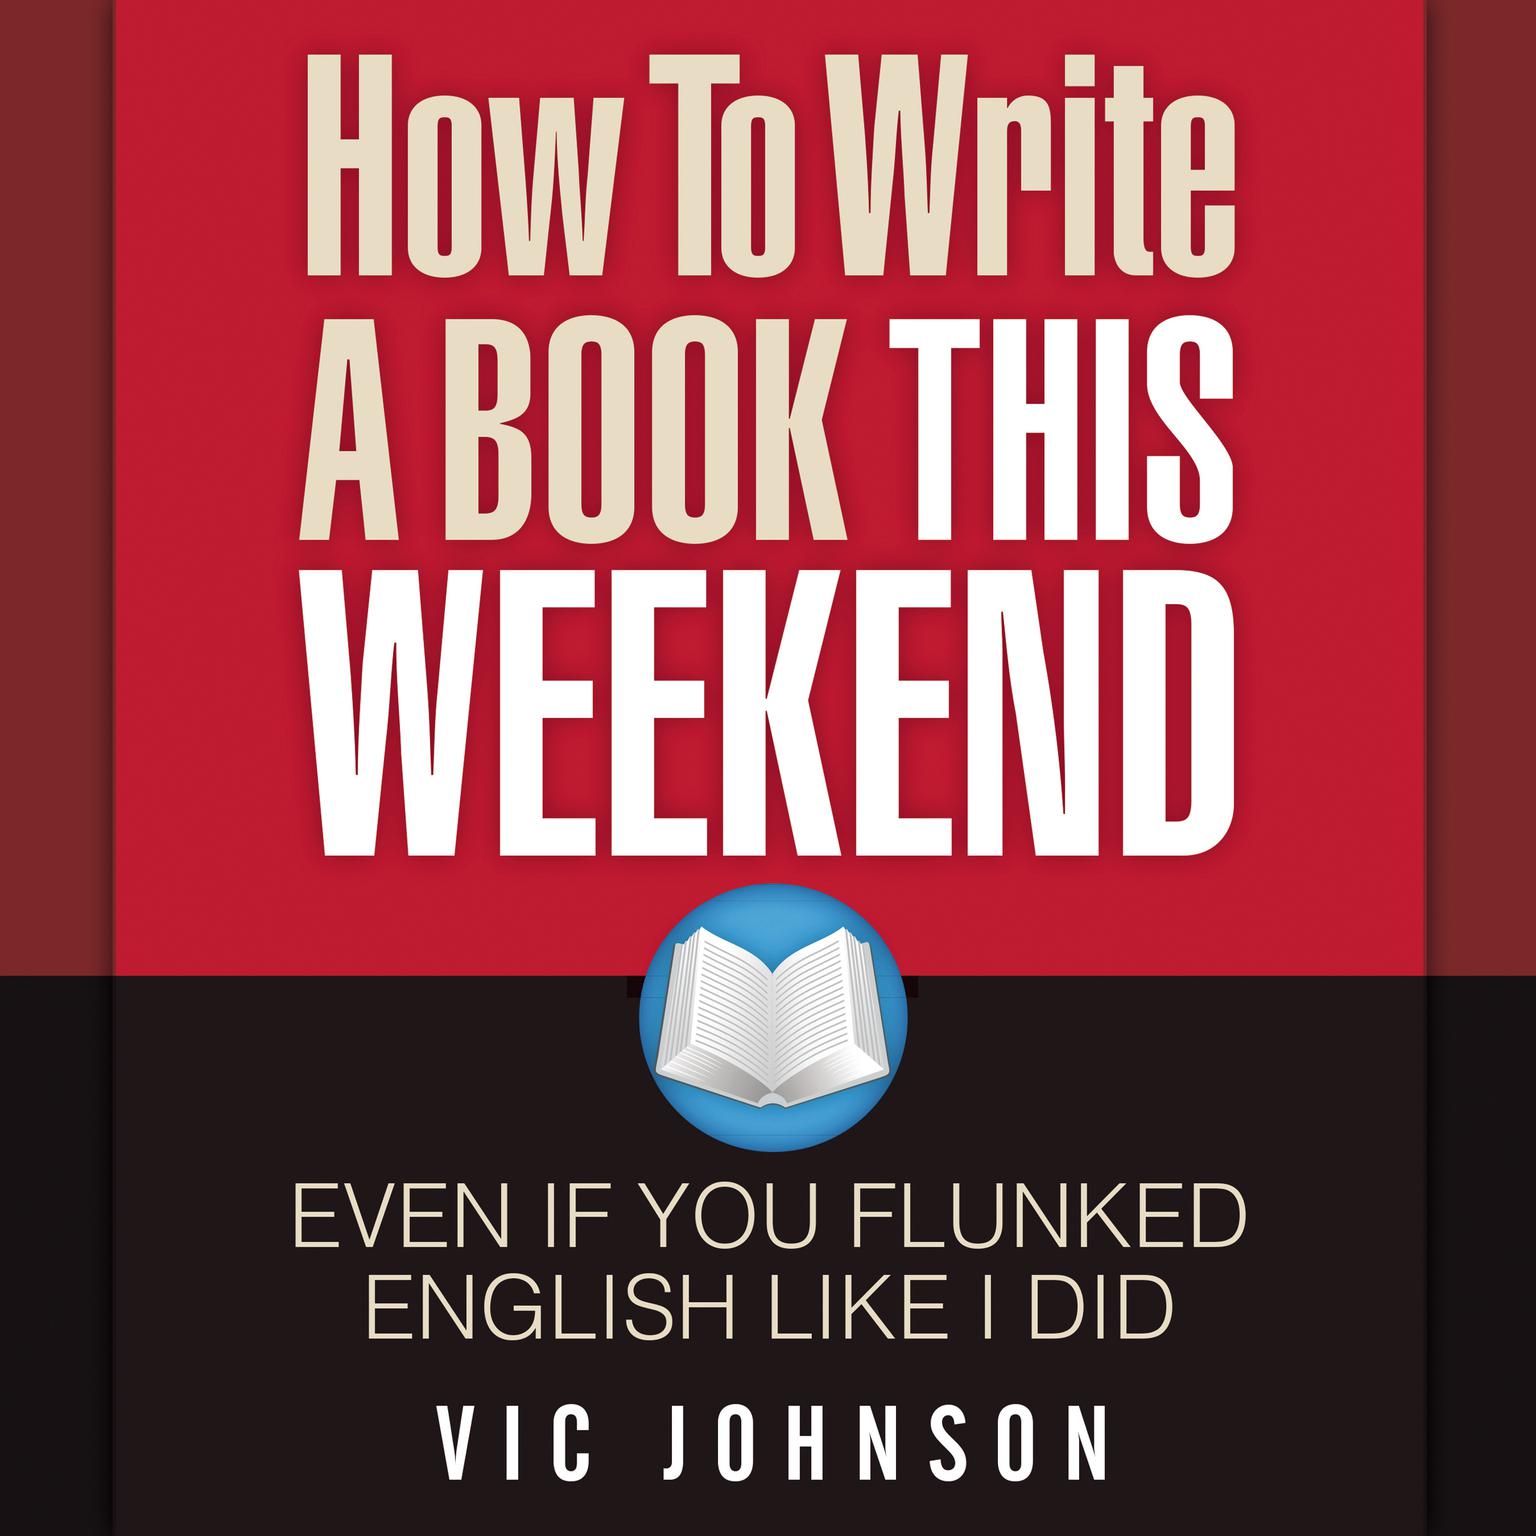 How to Write a Book This Weekend, Even If You Flunked English Like I Did Audiobook, by Vic Johnson